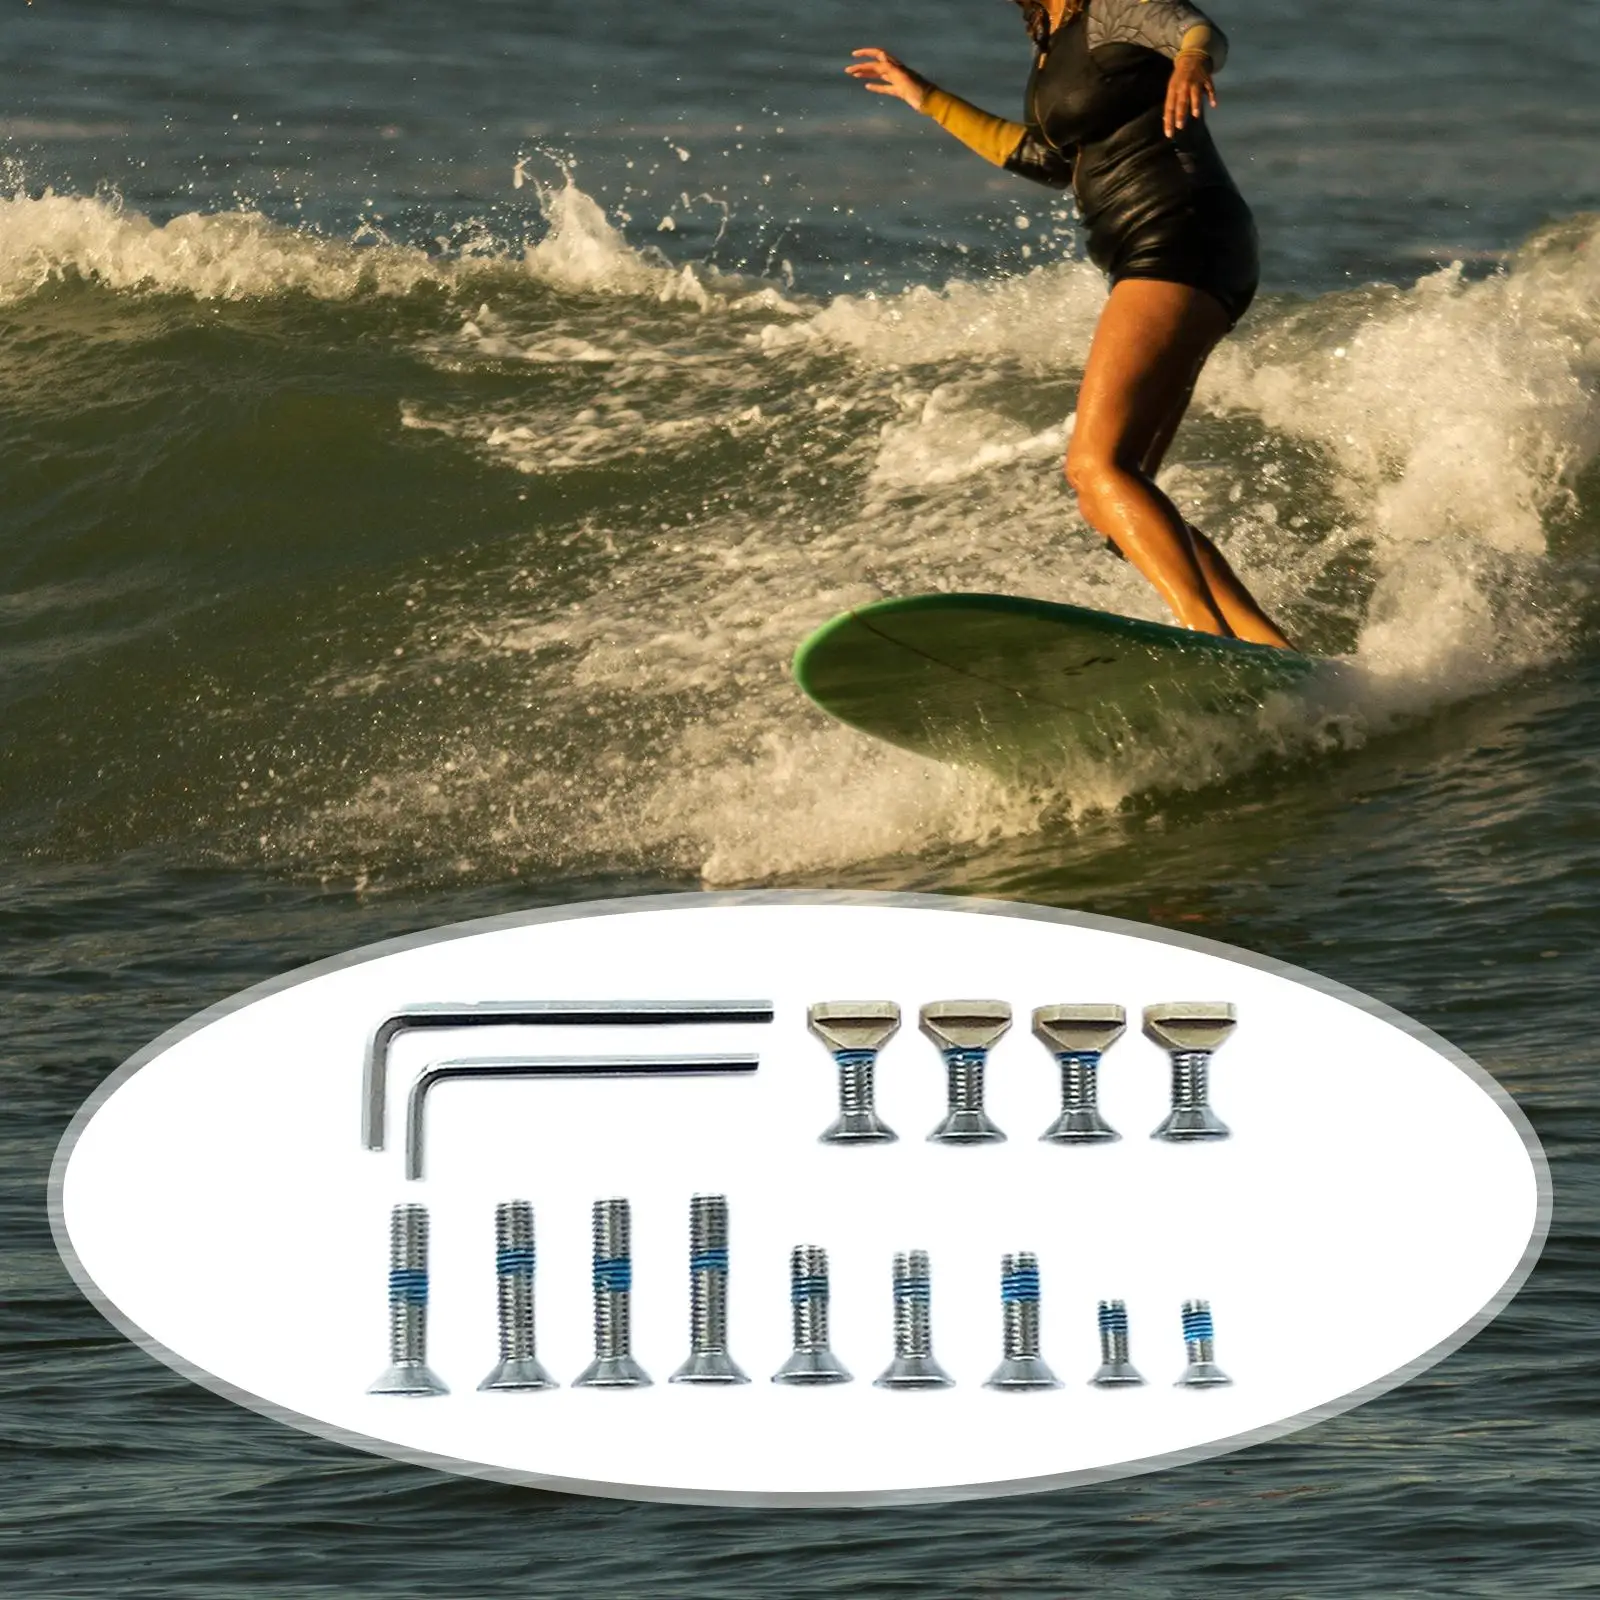 Surfboard Fin Screws Replace Waterproof for Stand Paddle Paddleboard